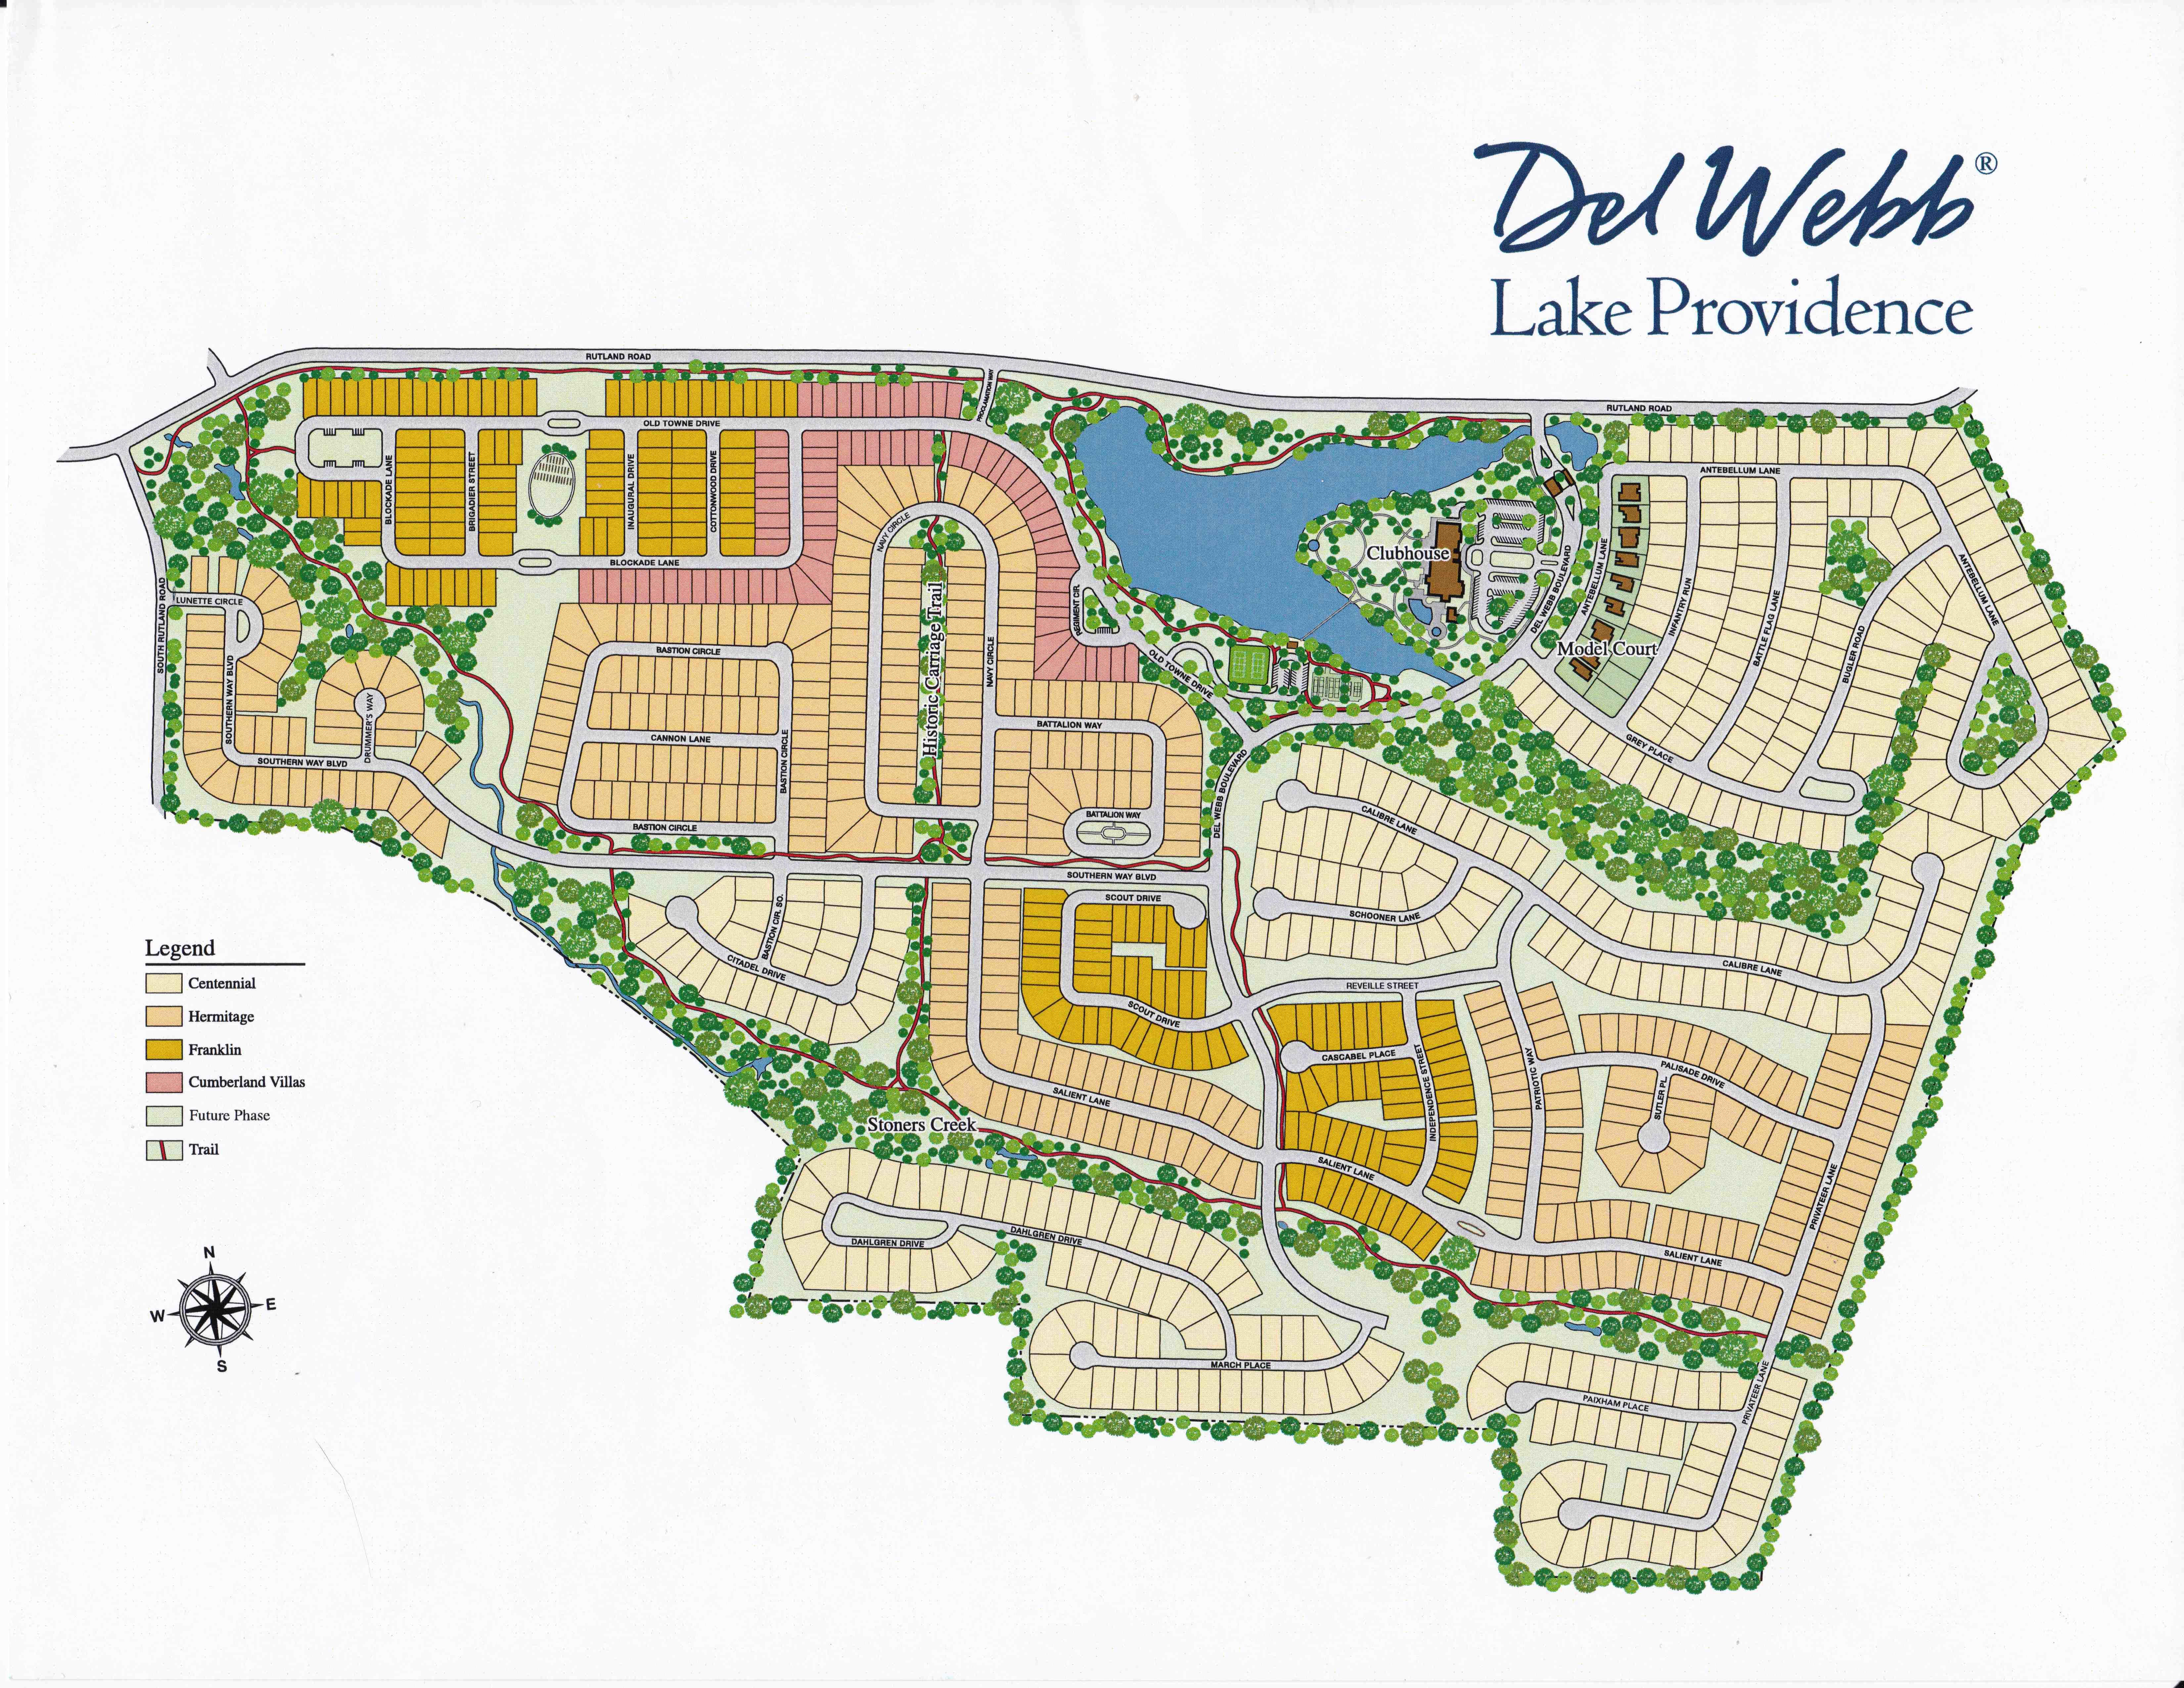 Del Webb at Lake Providence Mount Juliet, Tennessee